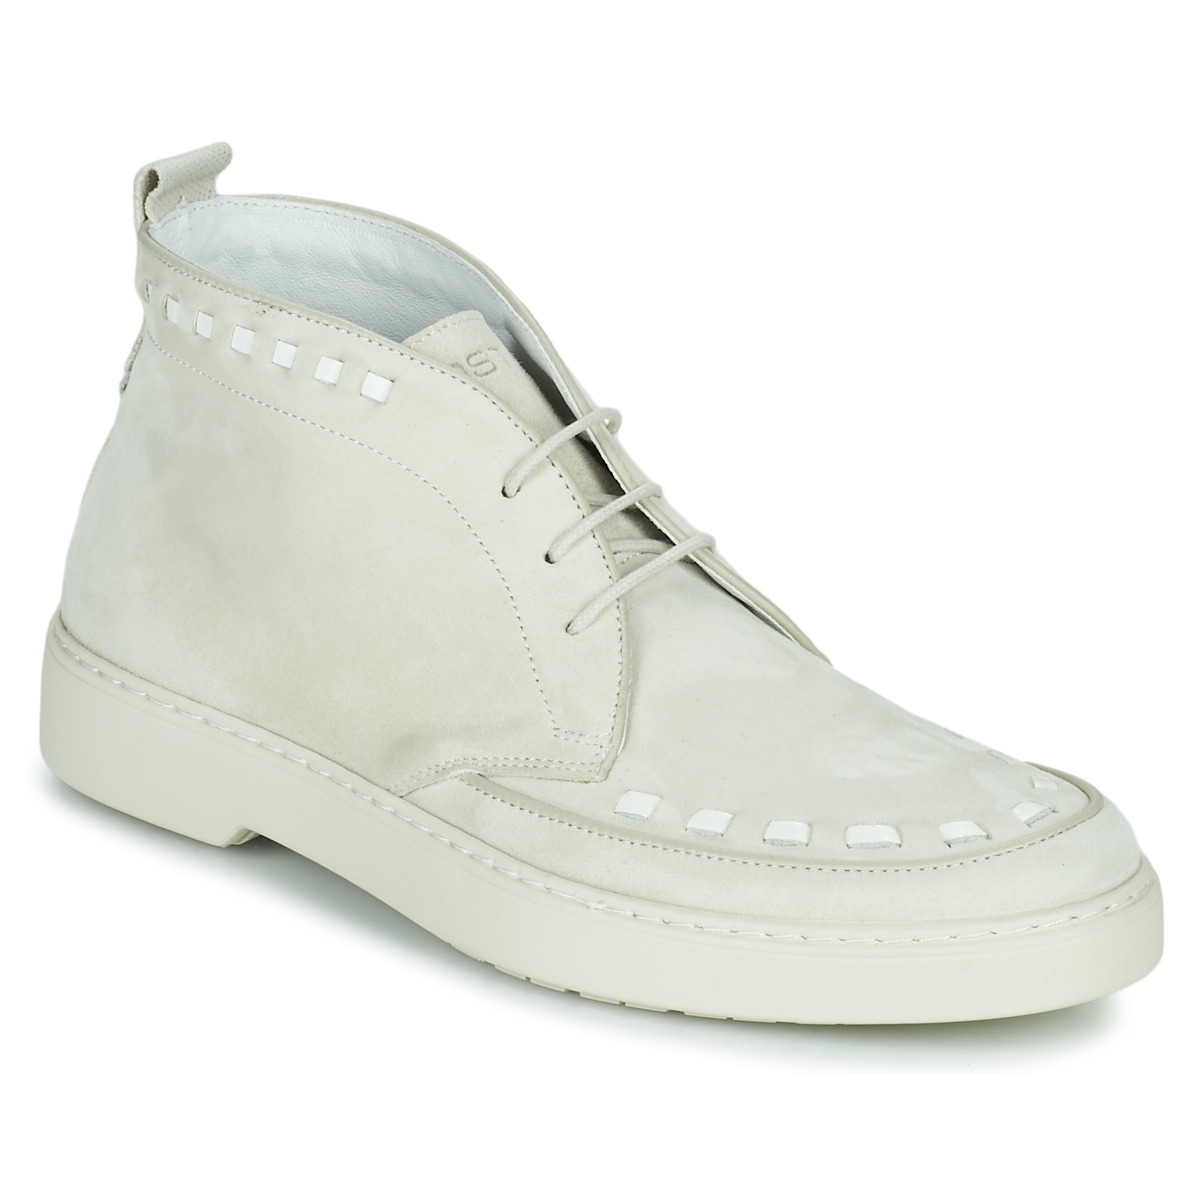 Kost - Boots in White for Men from Spartoo GOOFASH